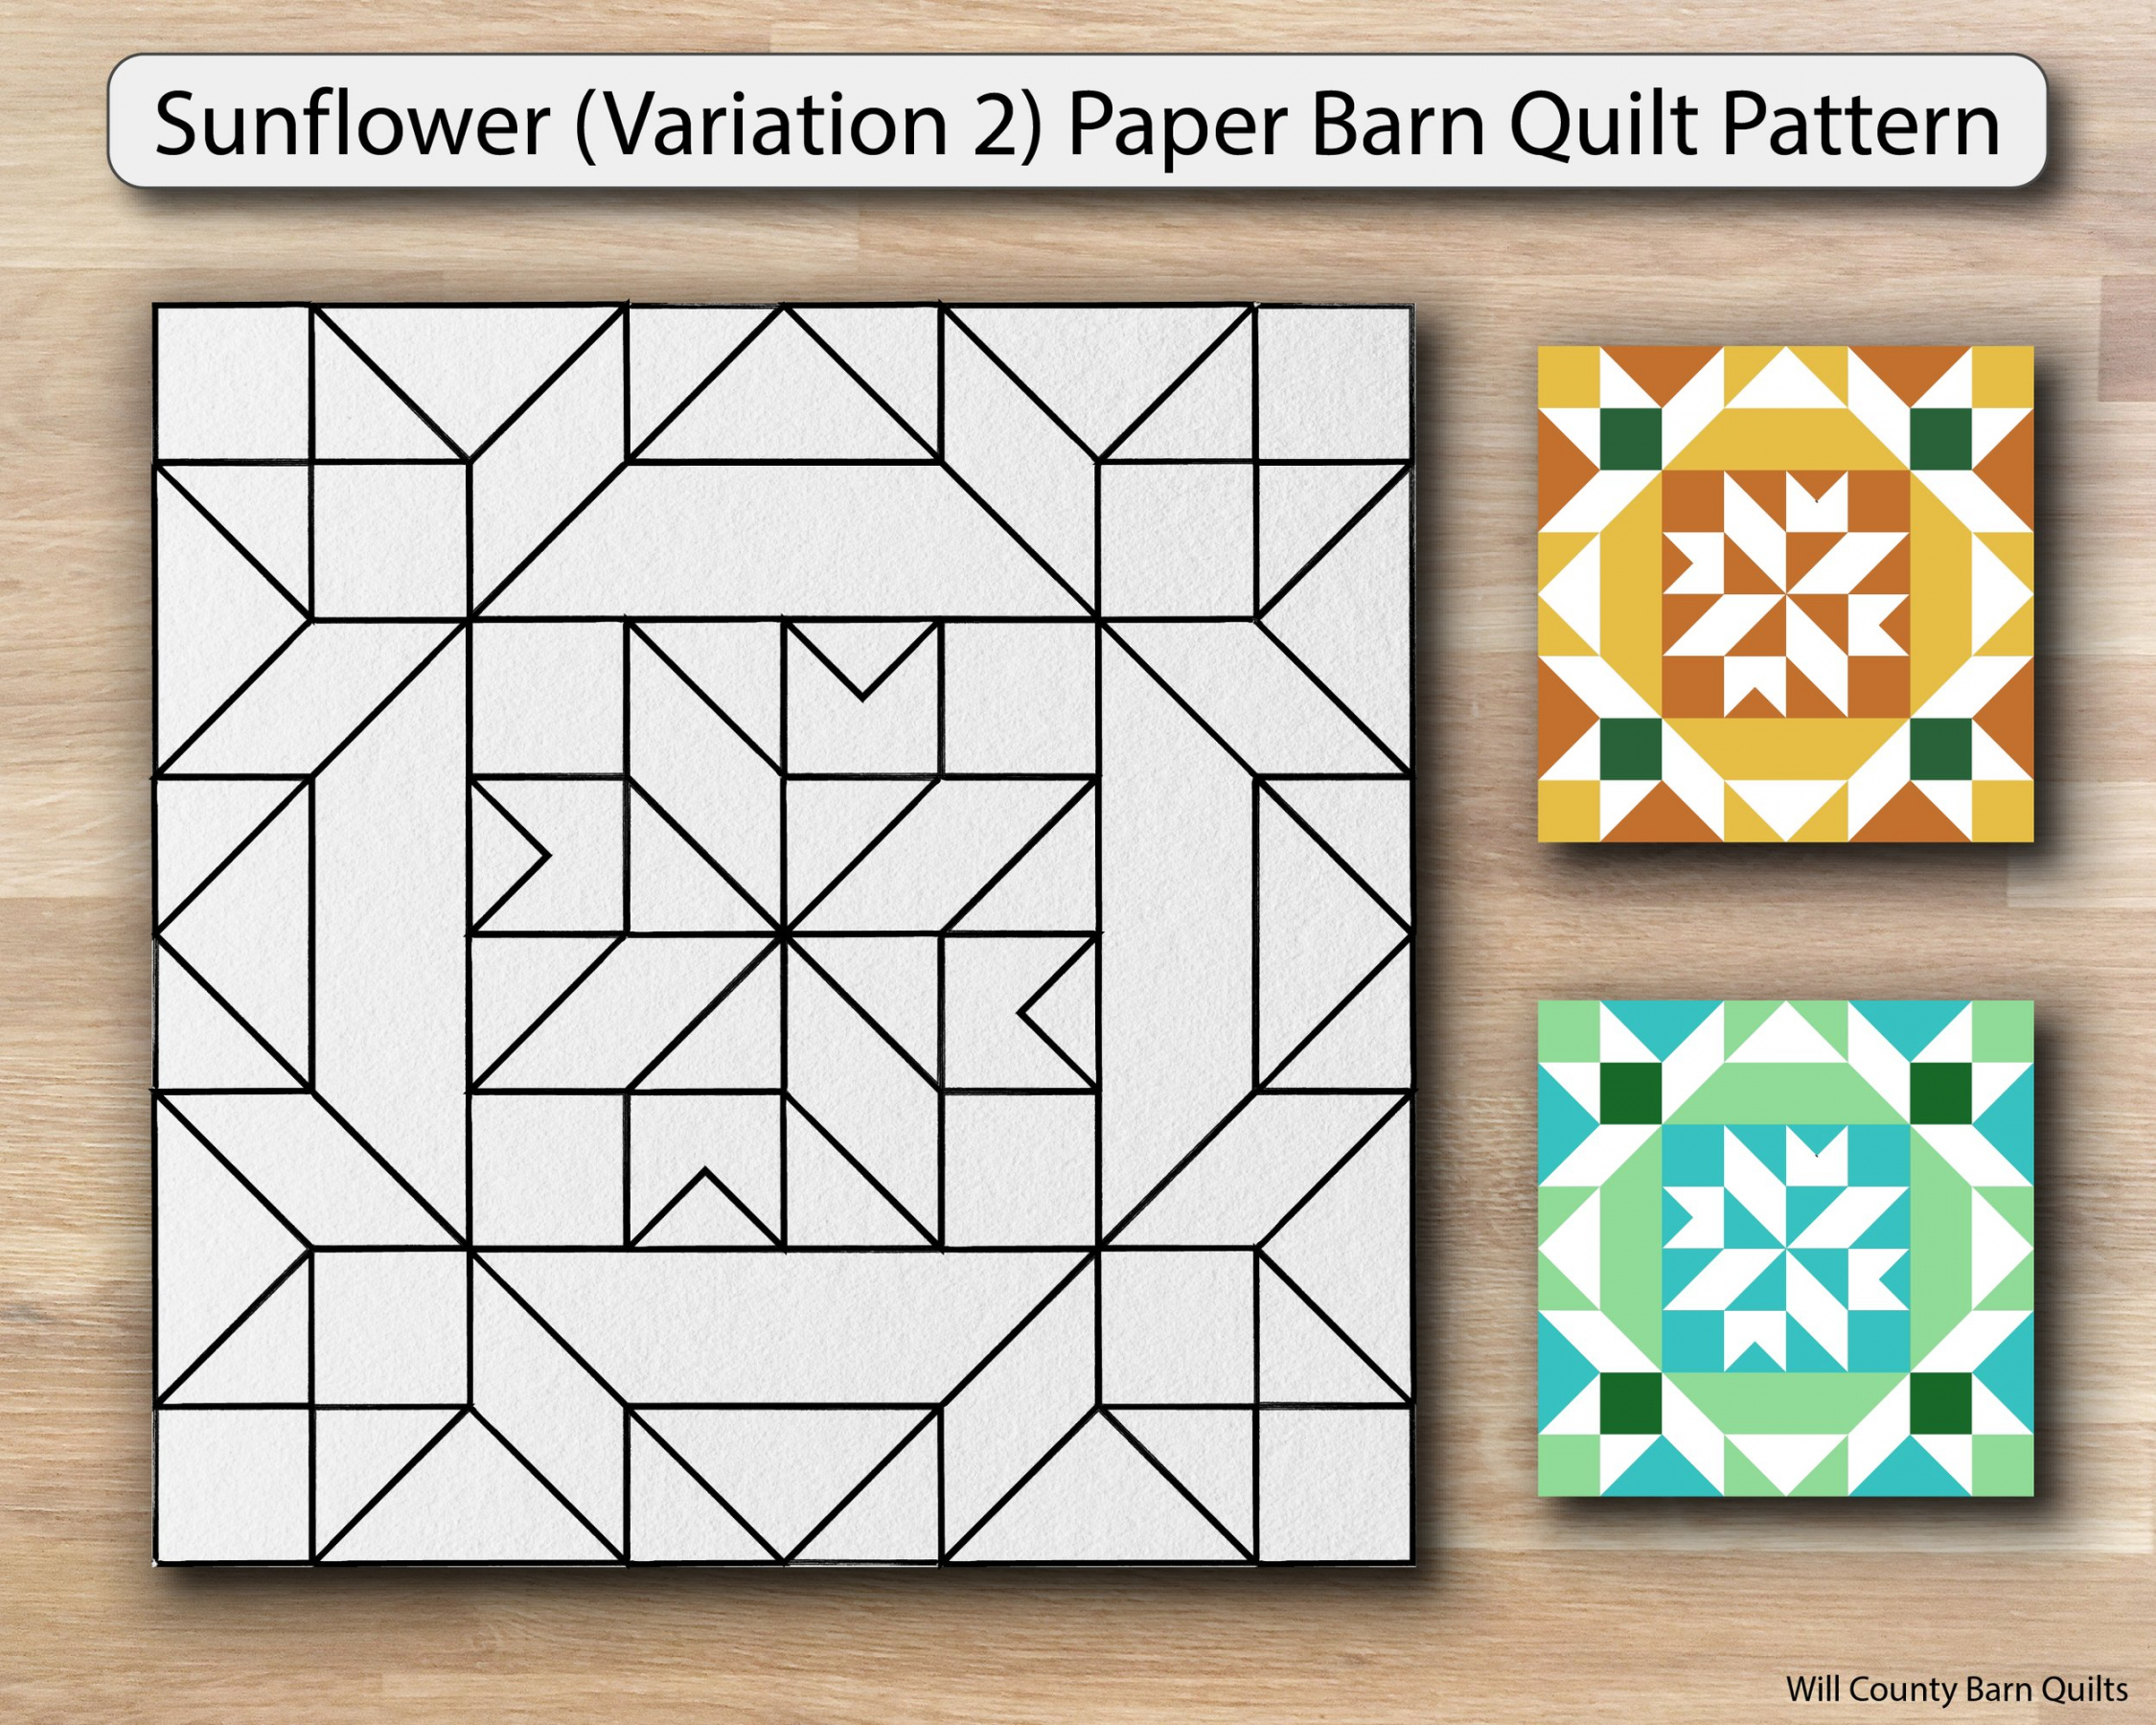 Template Quilt Patterns Free Printable - Printable - Paper Barn Quilt Patterns for Barn Quilt Trail, Will County